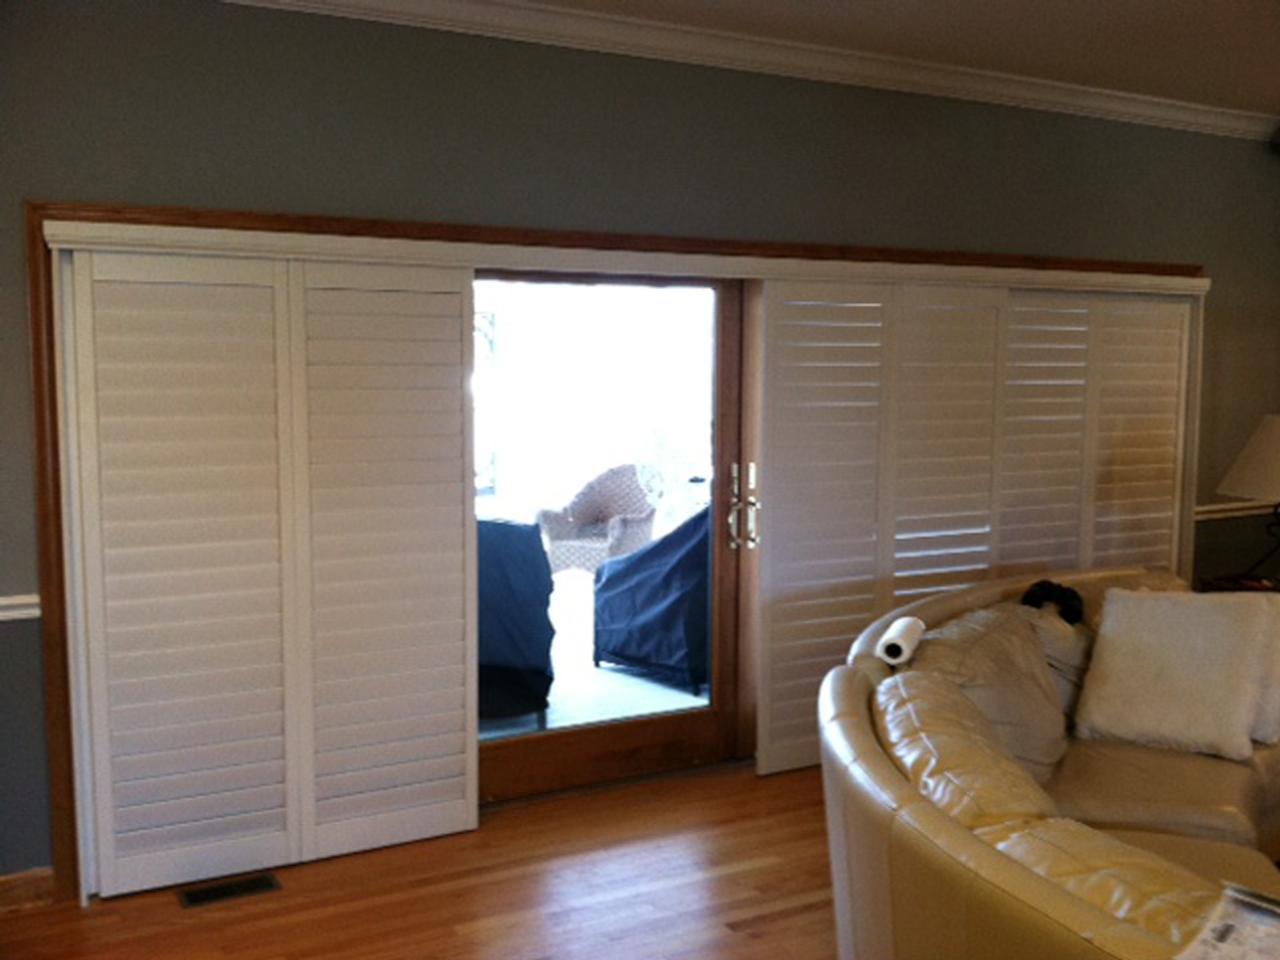 Plantation shutters on French doors bypass open with louvers shut